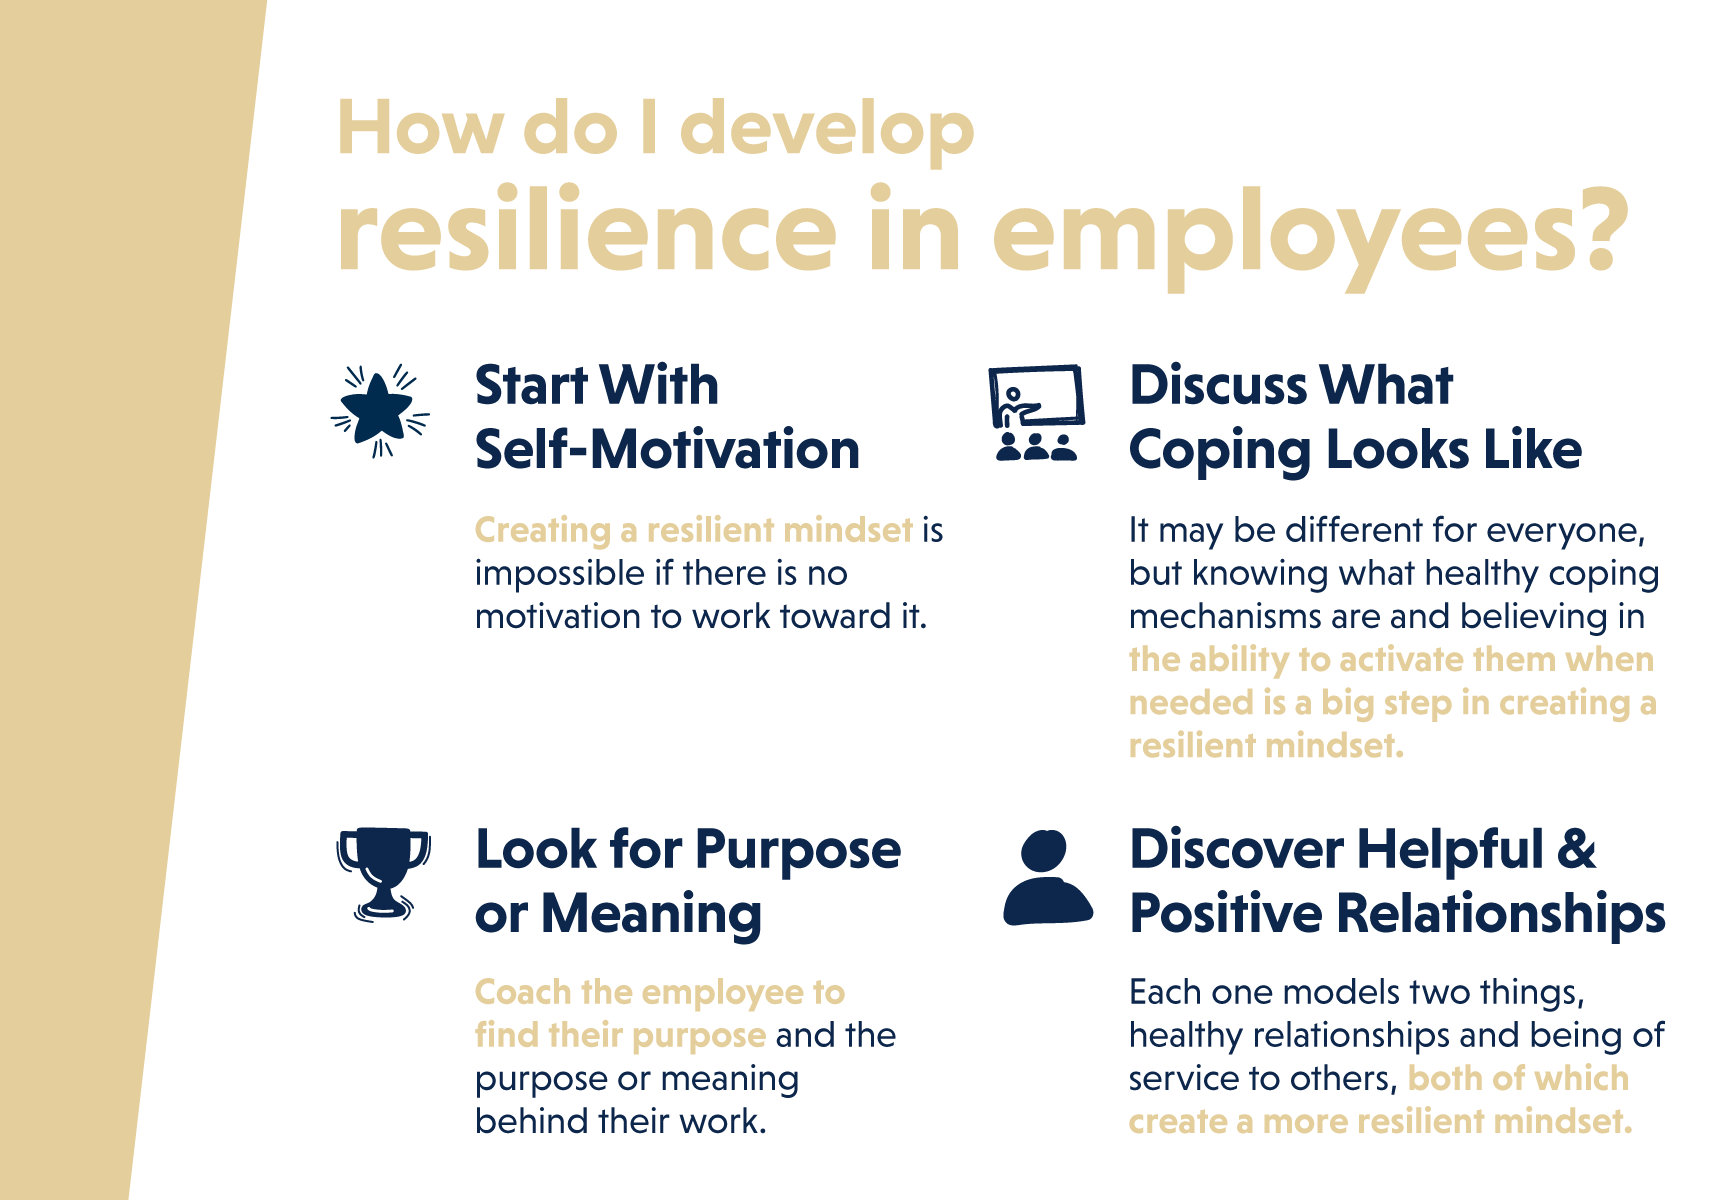 How do I develop resilience in imployees?